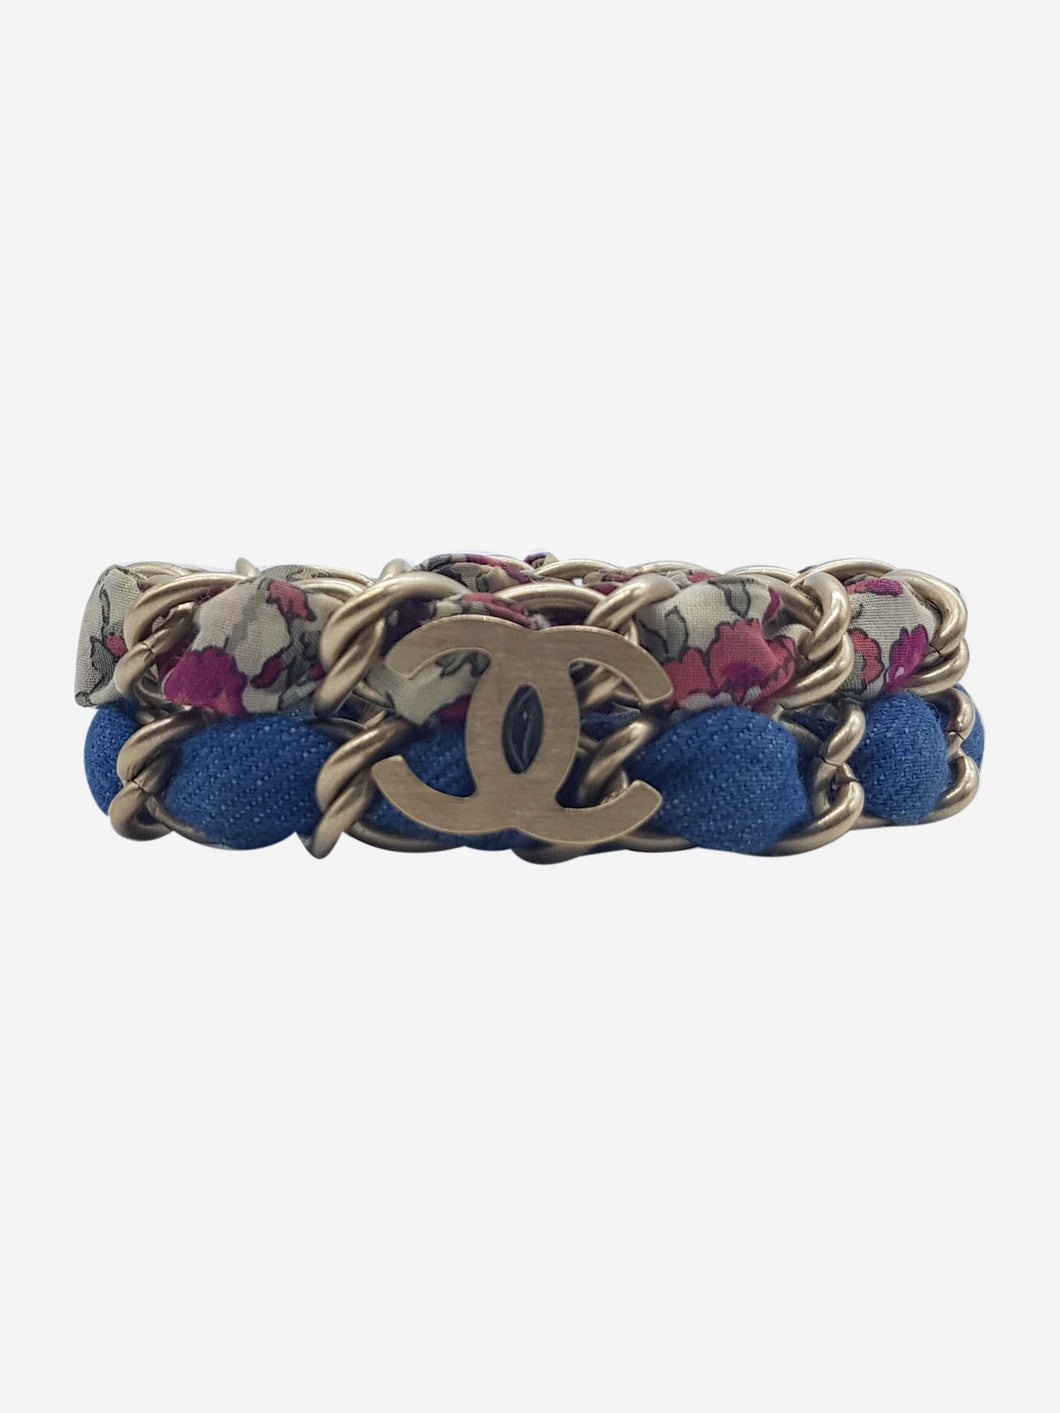 Gold woven chain link and logo bracelet Jewellery Chanel 